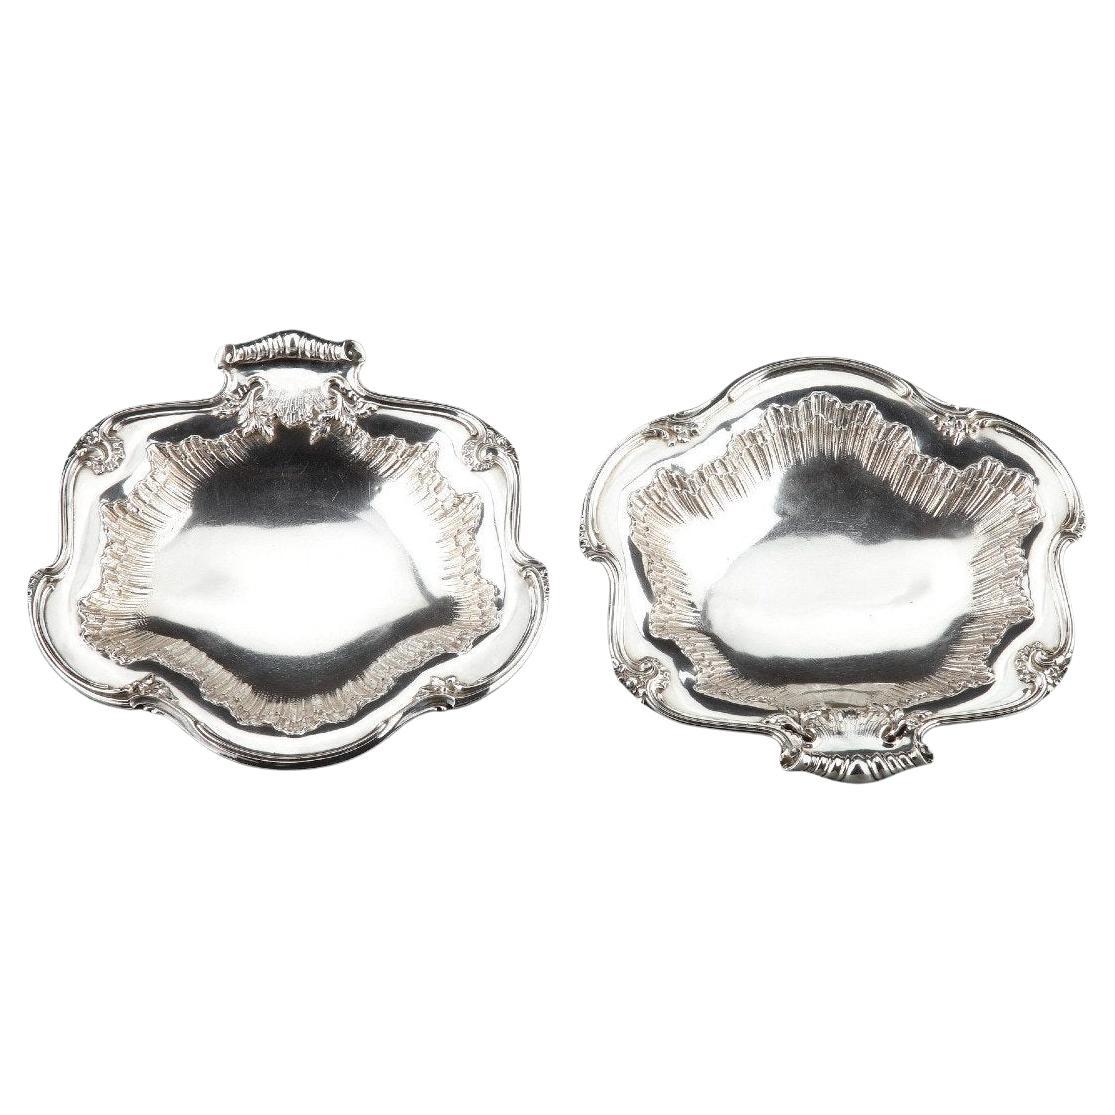 Silversmith Bointaburet - Pair Of Solid Silver Displays From The Late 19th For Sale